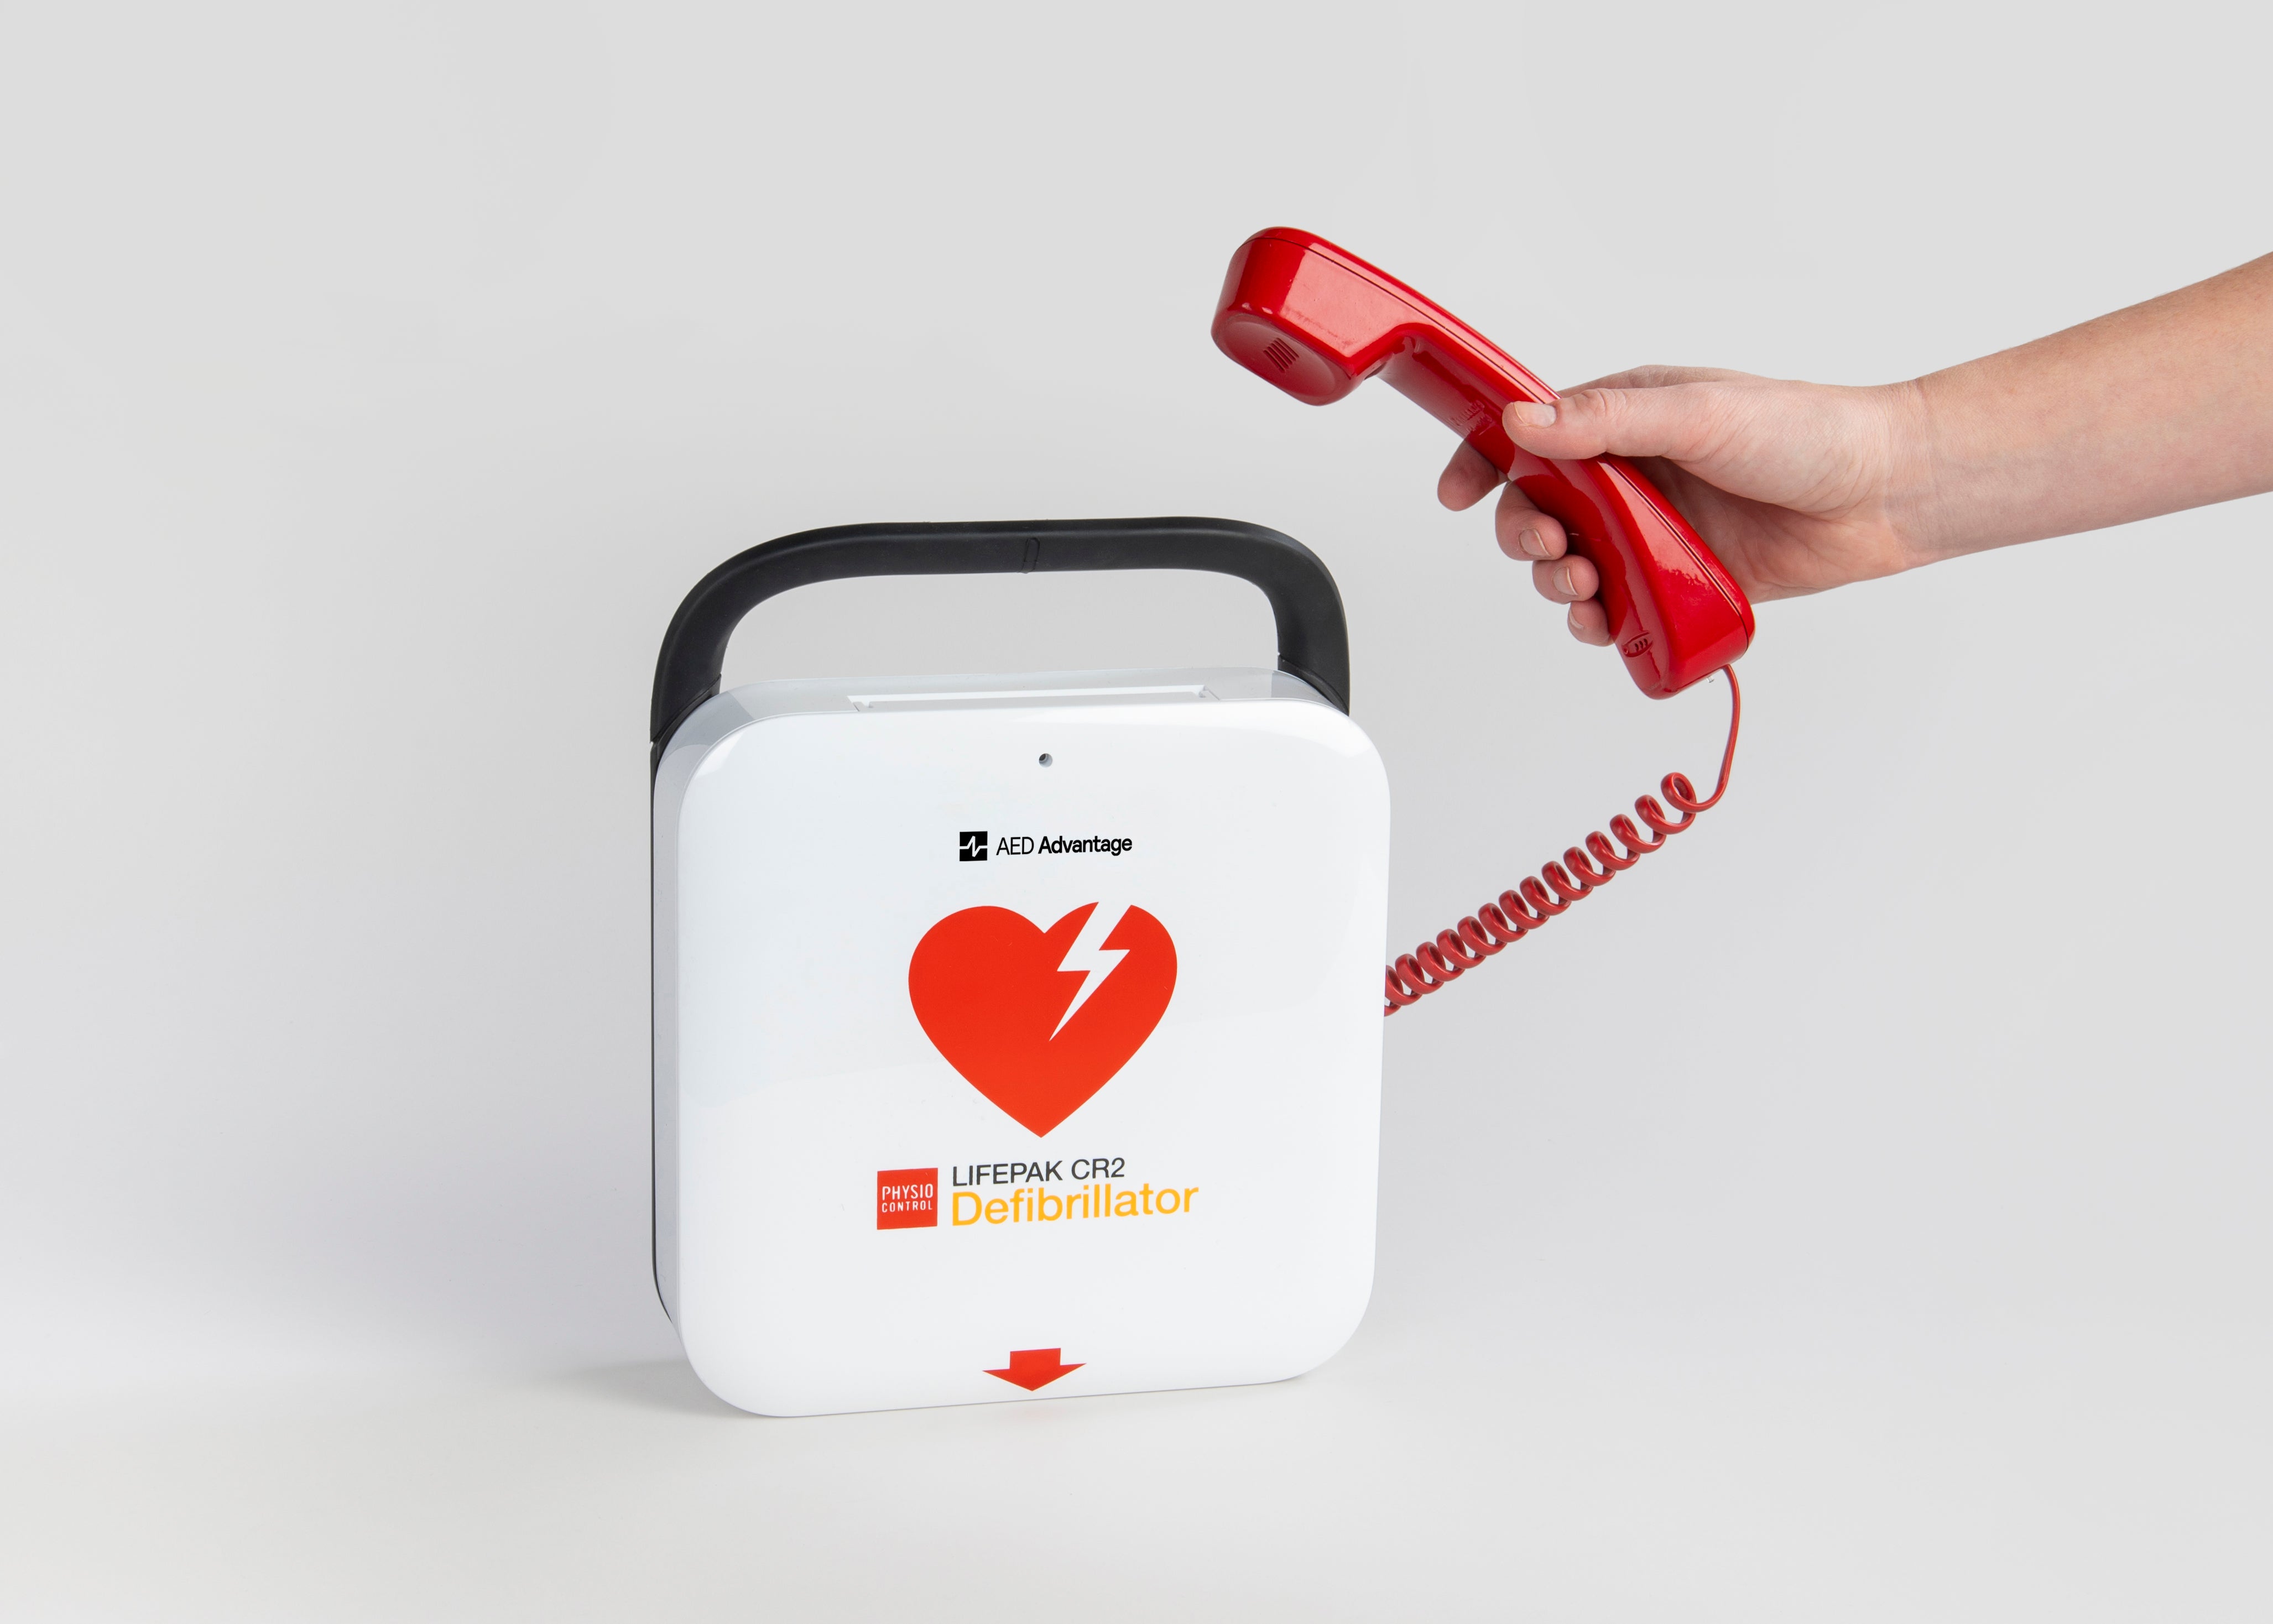 A bright red phone being held next to a white and red LIFEPAK CR2 AED.